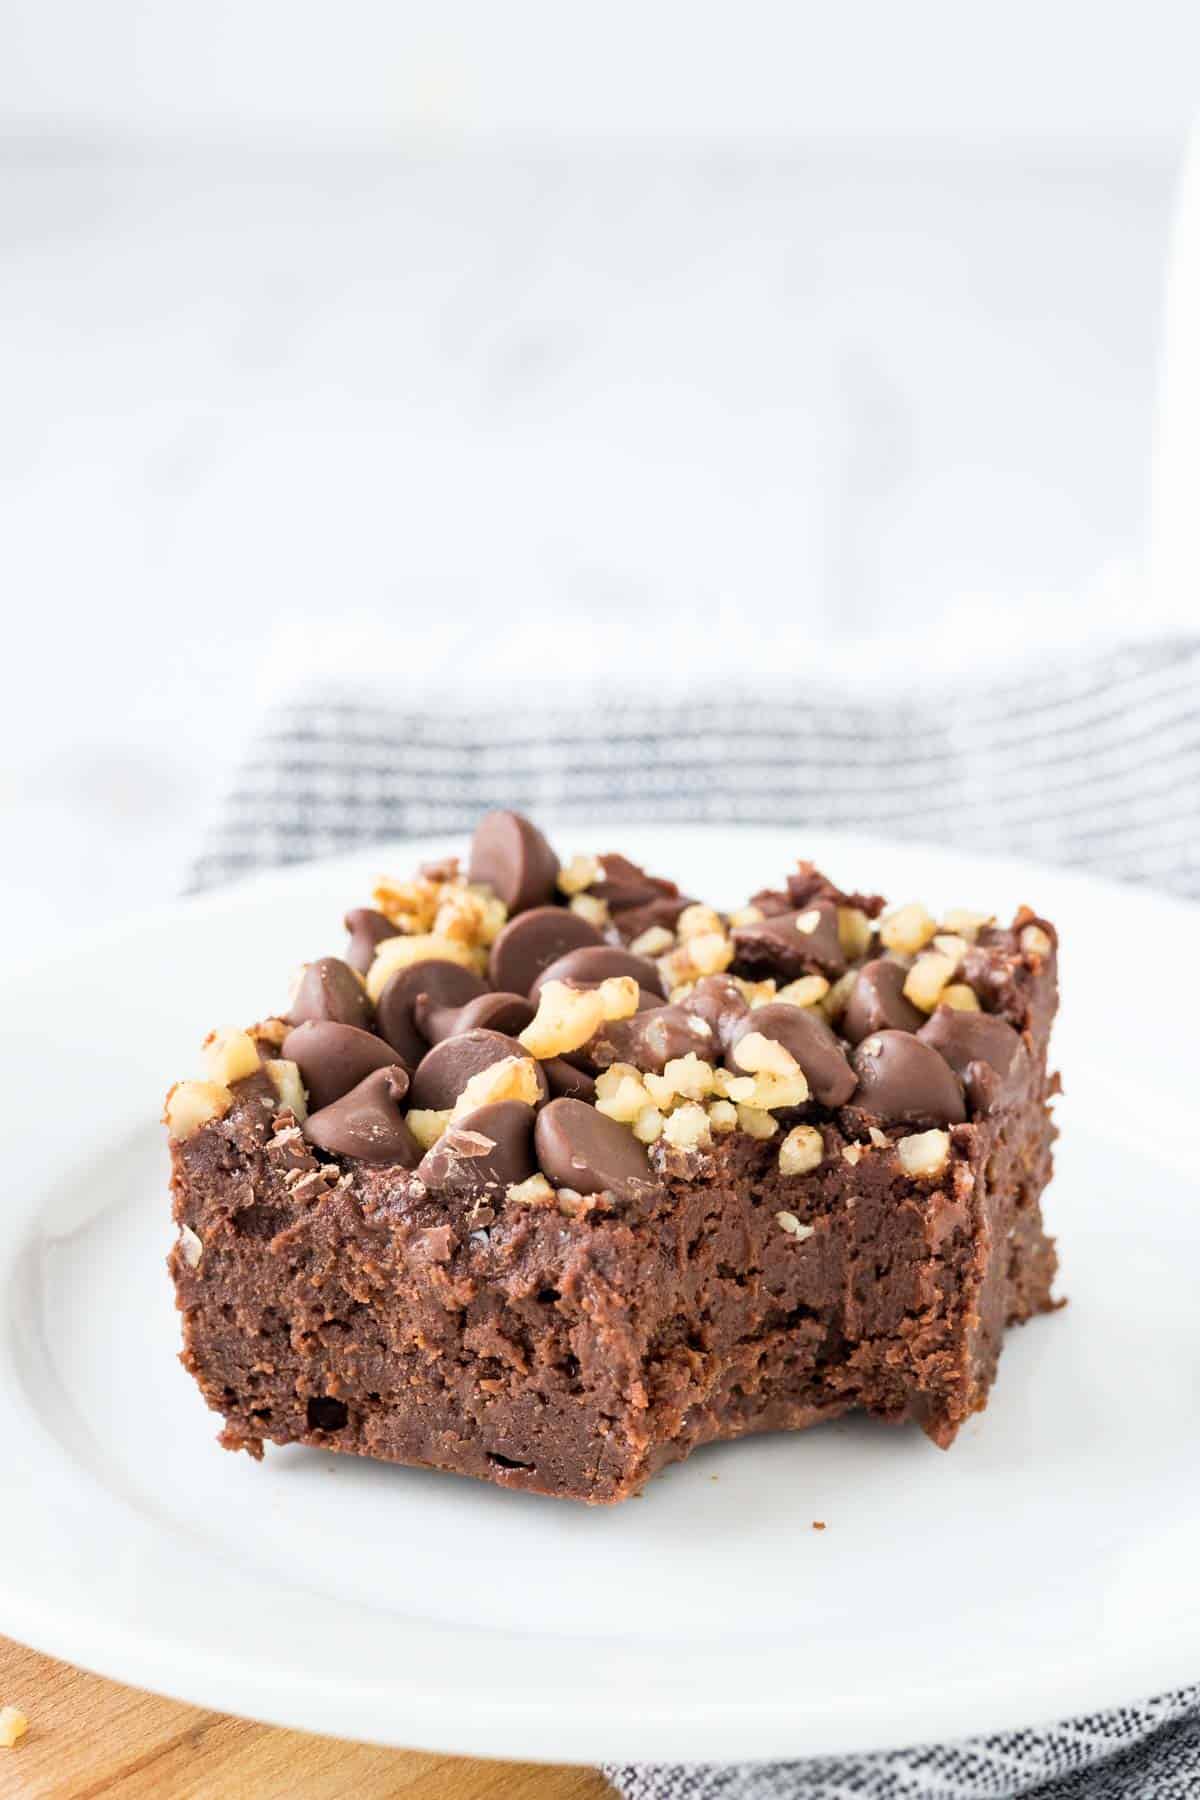 A brownie topped with walnuts and chocolate chips on a white plate.